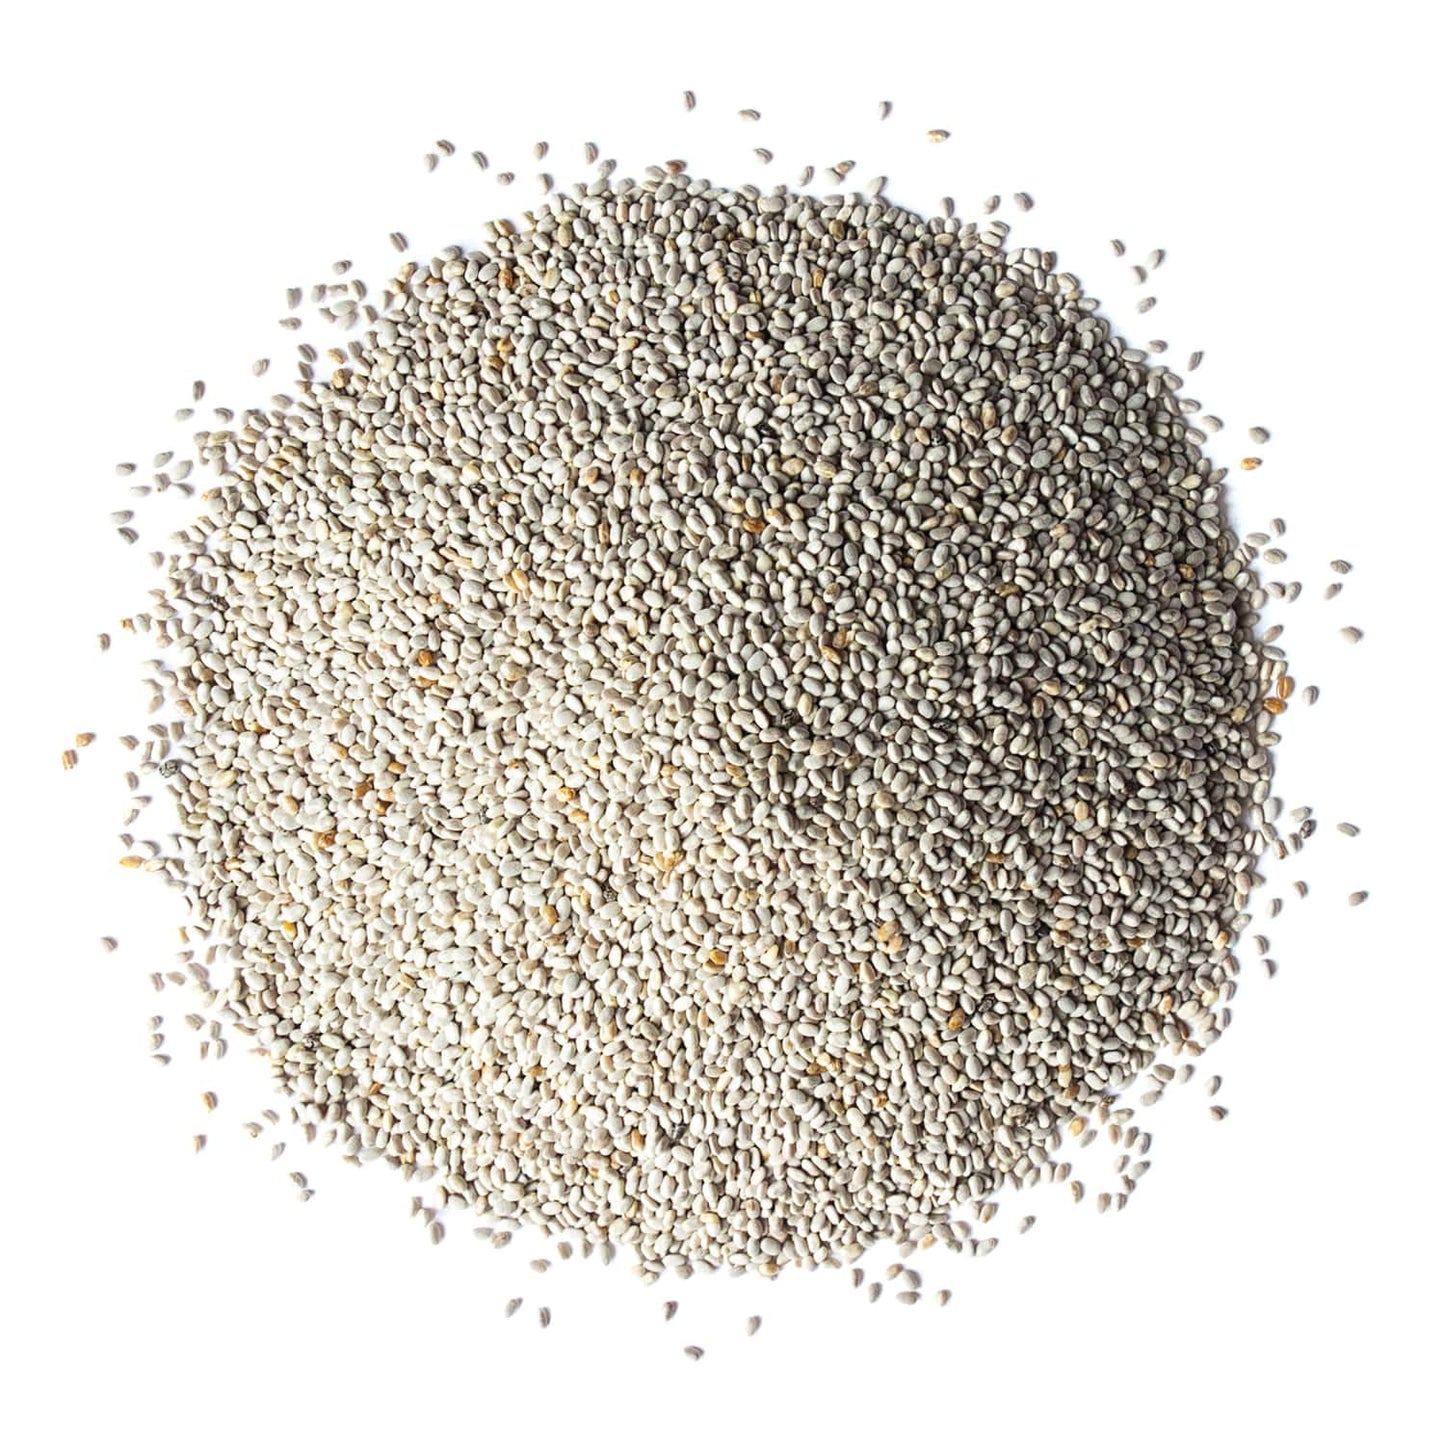 White Chia Seeds — Non-GMO Verified, Whole, Raw, Kosher, Keto, Vegan, Bulk, Rich in Omega 3, Great for Cereals and Smoothies, Sirtfood - by Food to Live